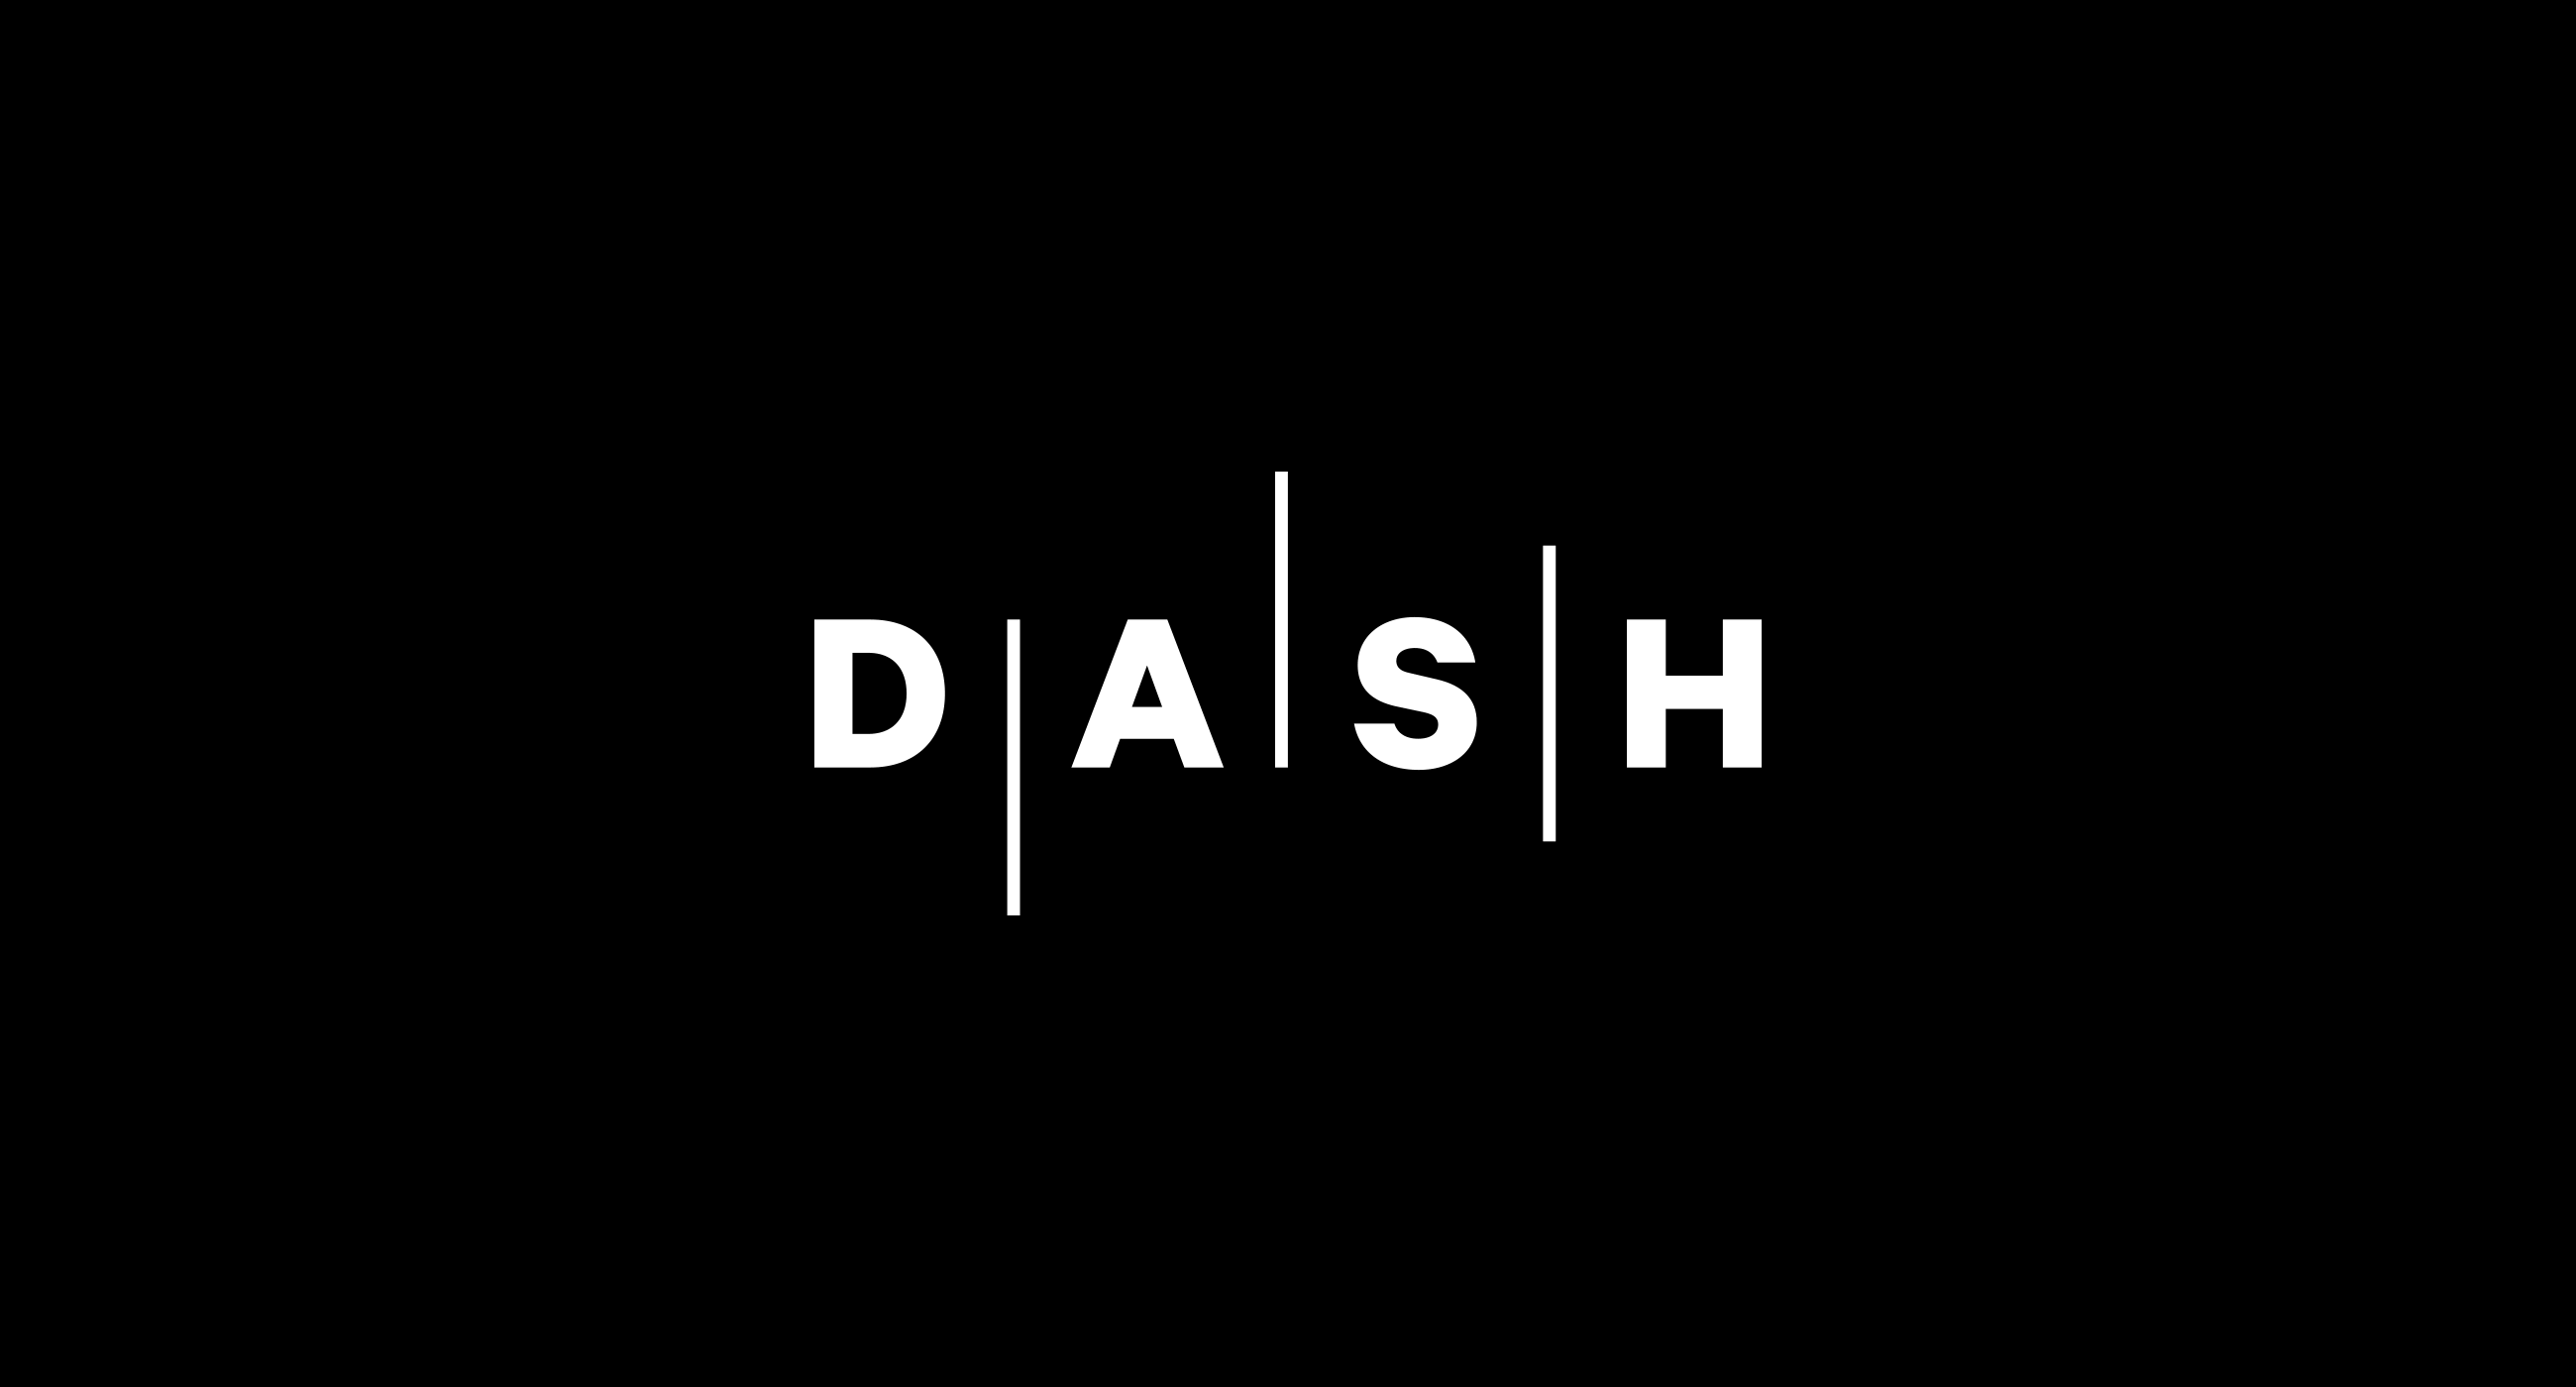 'DASH' in large bold letters, seperated by animated vertical bars(white), shifting up, center, and down at a set internal. The vertical bars, though they are shifting up and down, remain staggered from one another. Lettering and animated shapes are centered on a black background.